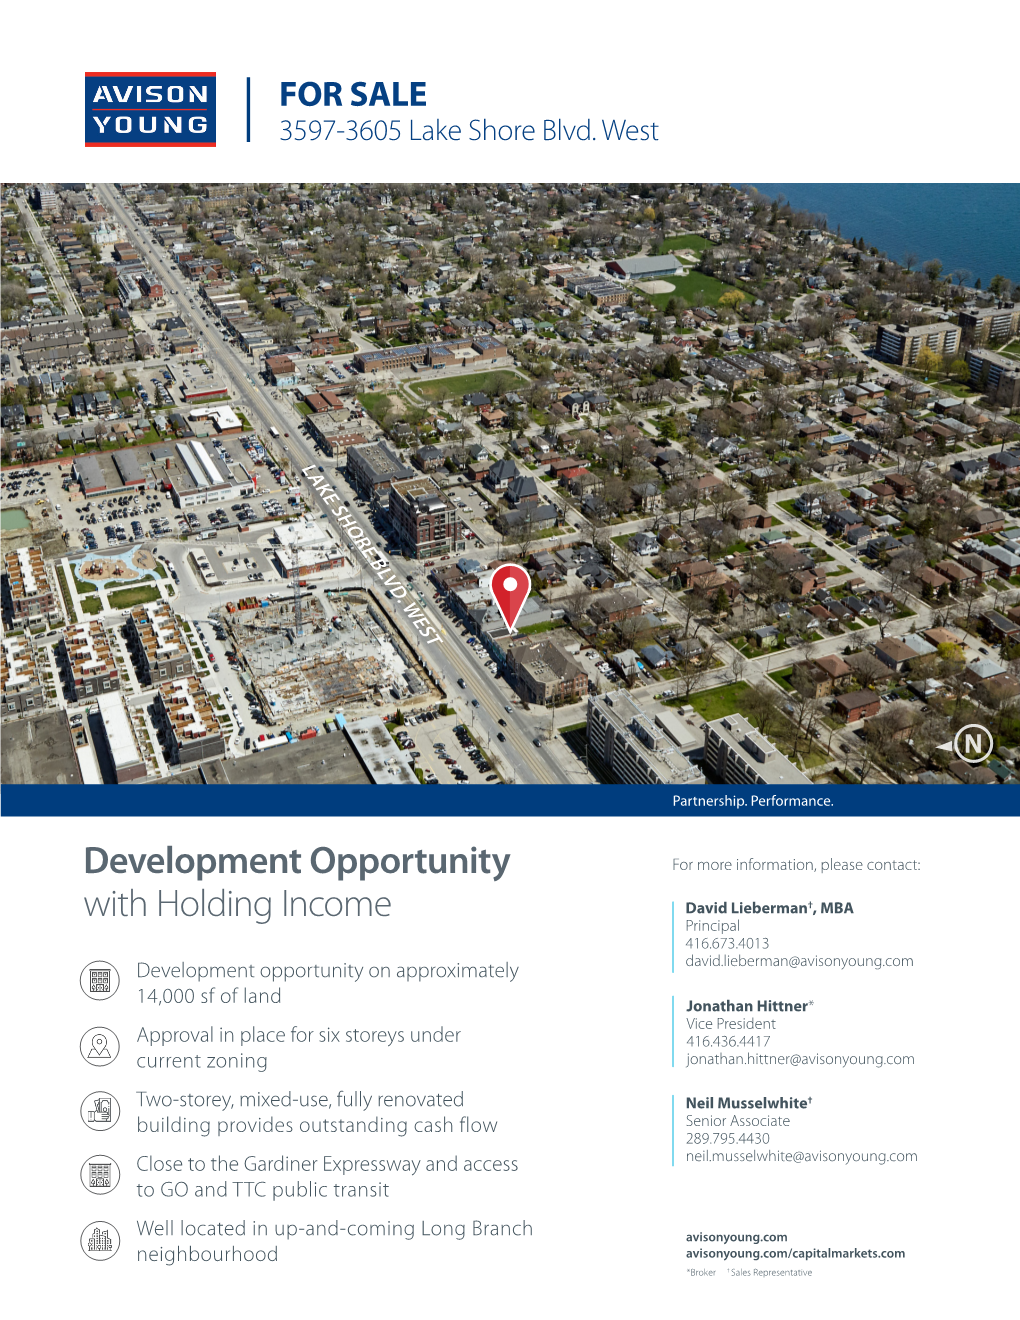 Development Opportunity with Holding Income